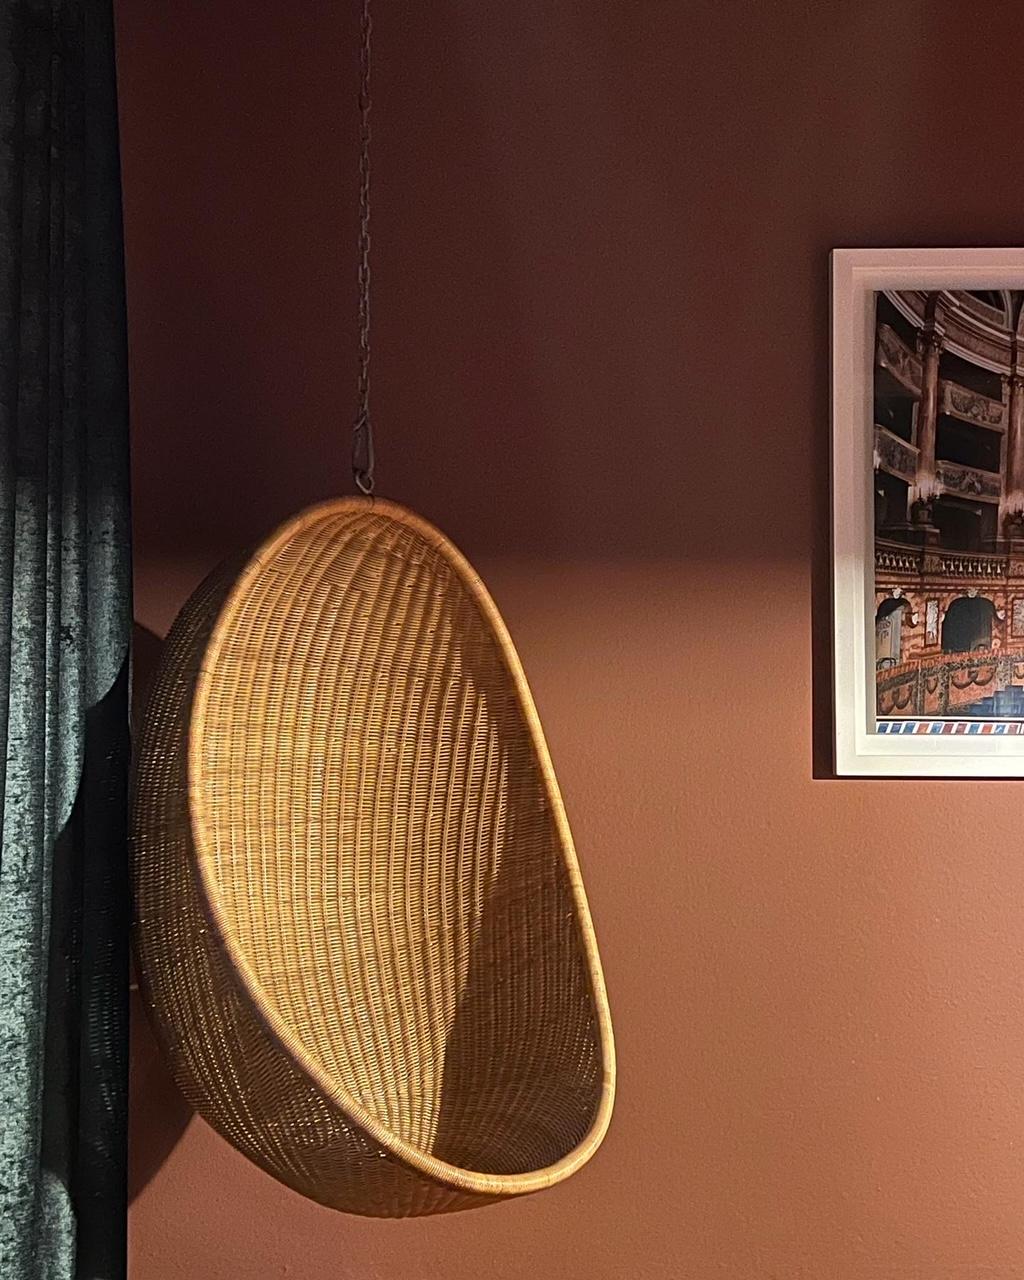 Mid-Century Modern Egg Hanging Chair by Nanna Ditzel, Authentic Historical Edition, 1959